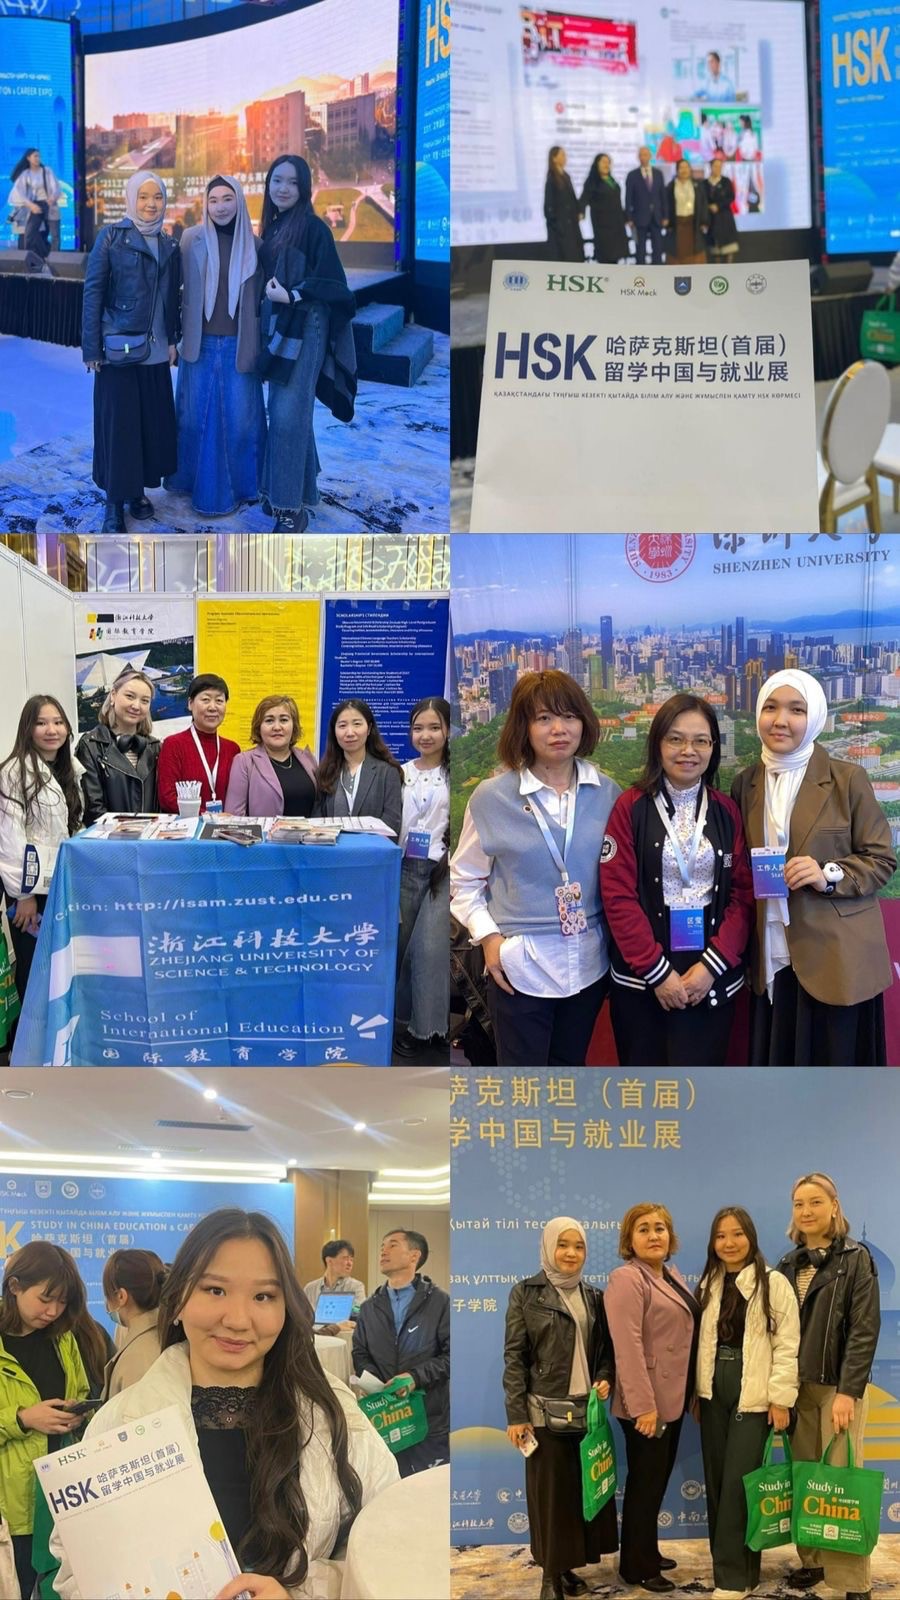 Study in China education & career expo